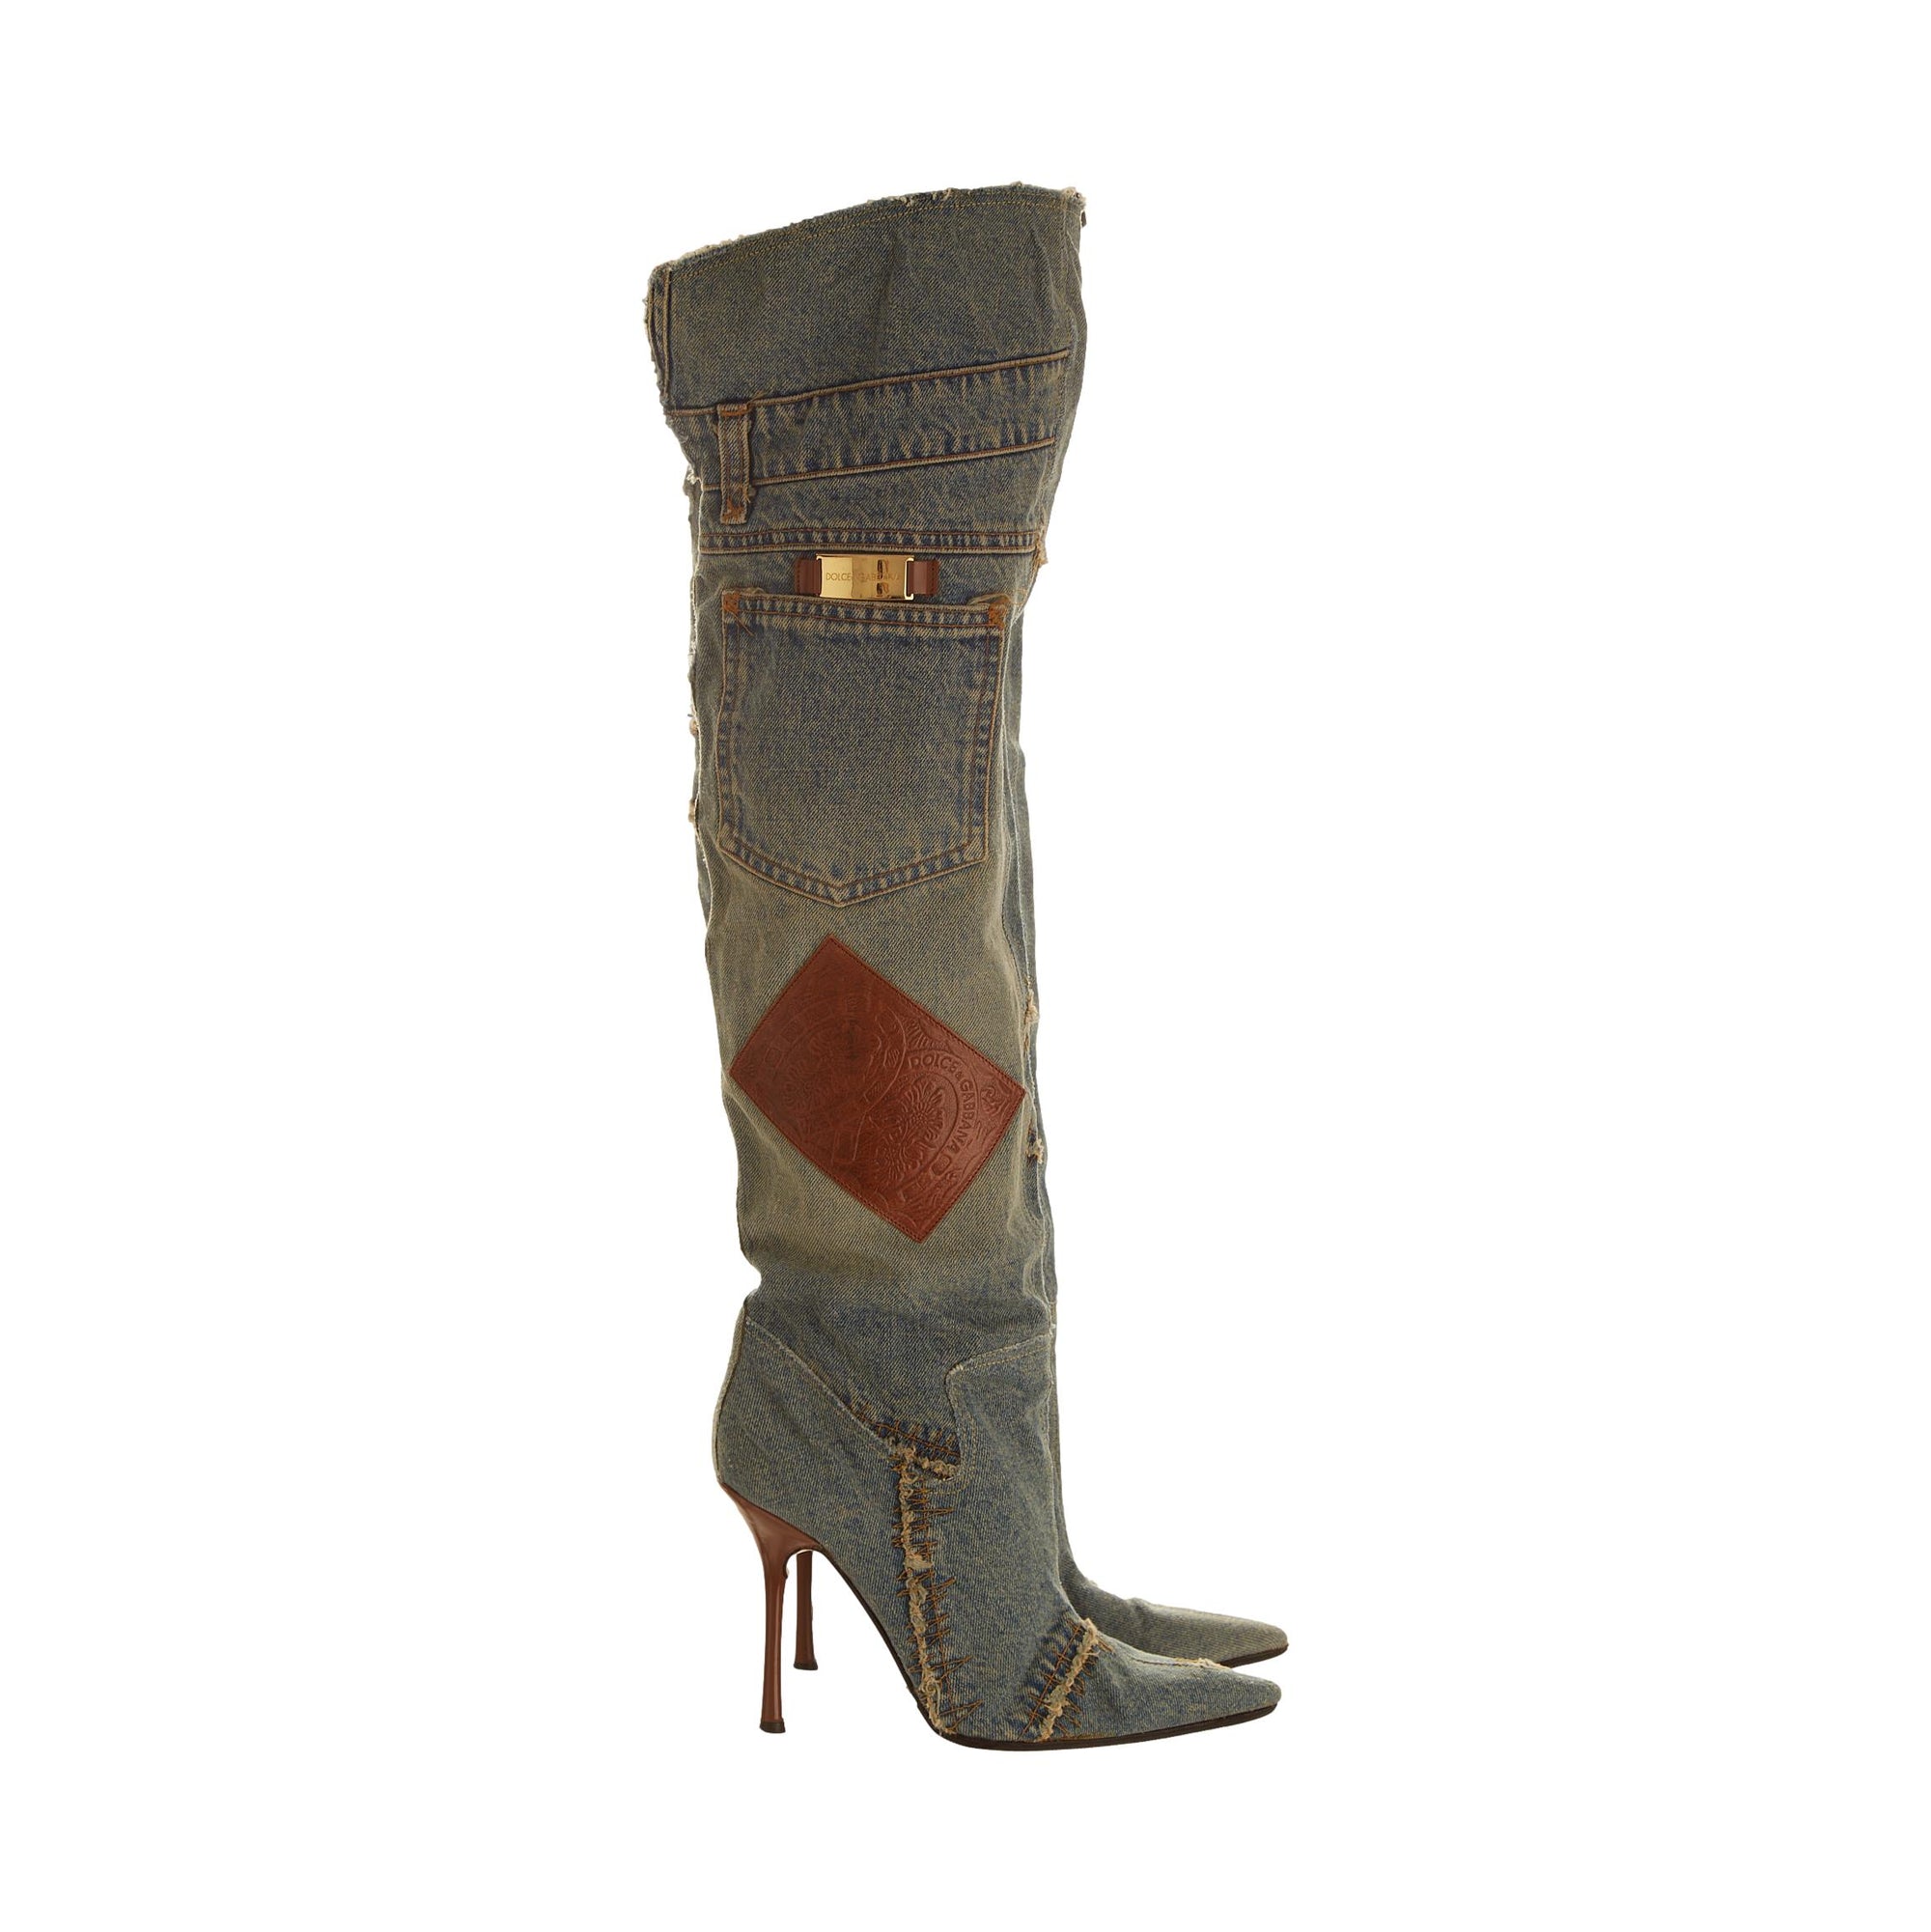 Dolce & Gabbana Denim Patchwork Over-The-Knee Boots